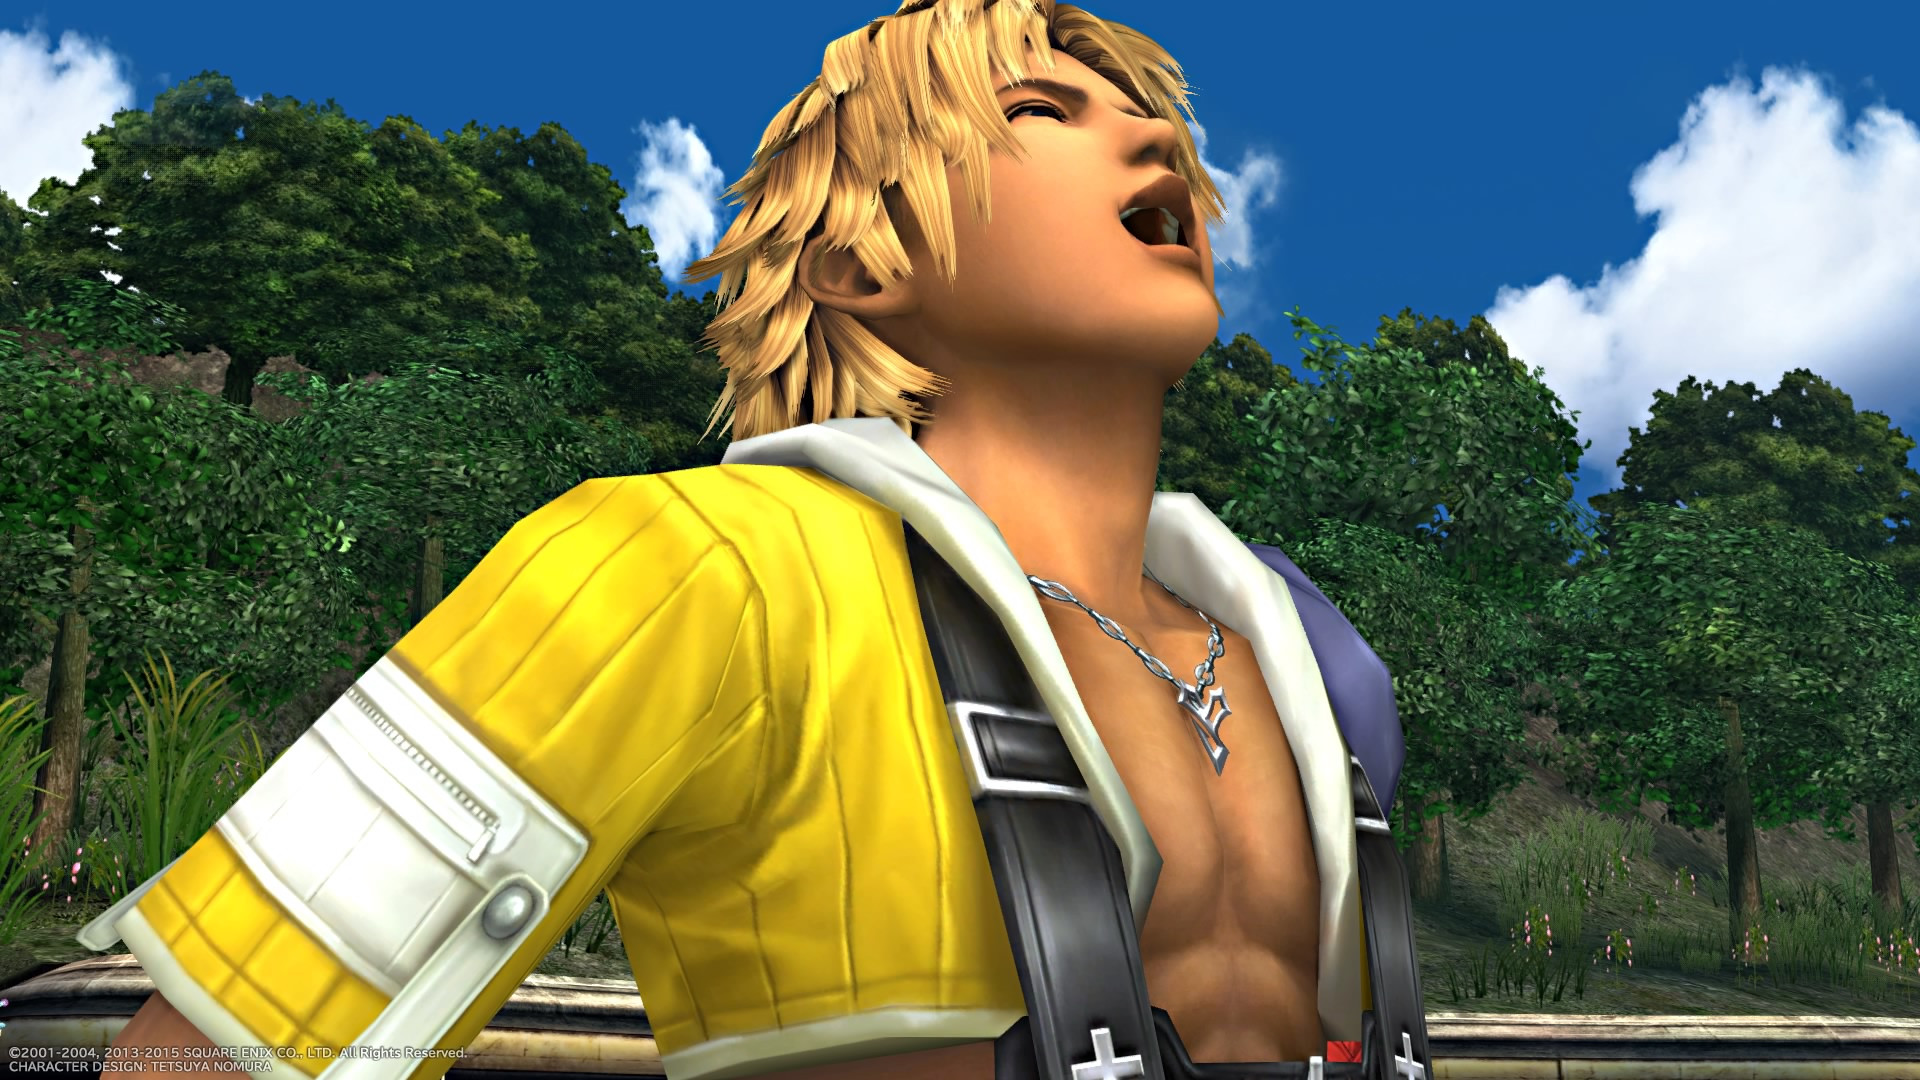 Final Fantasy X/X-2 HD Remaster Characters - Giant Bomb